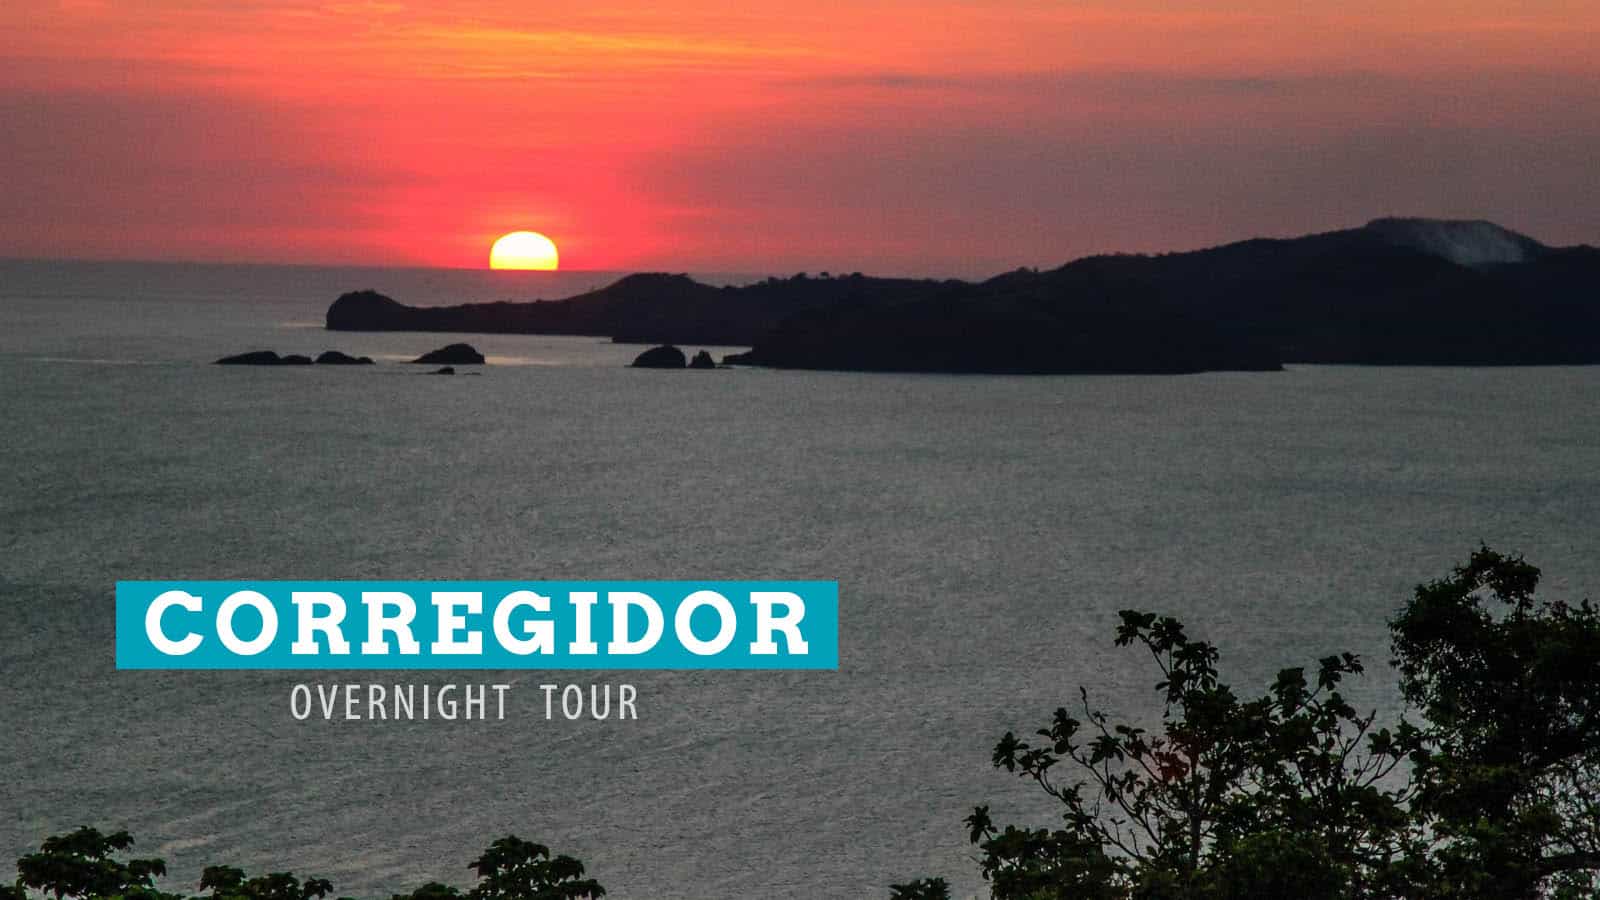 CORREGIDOR OVERNIGHT TOUR: 5 Things to Do (Other than Ghost-Hunting)